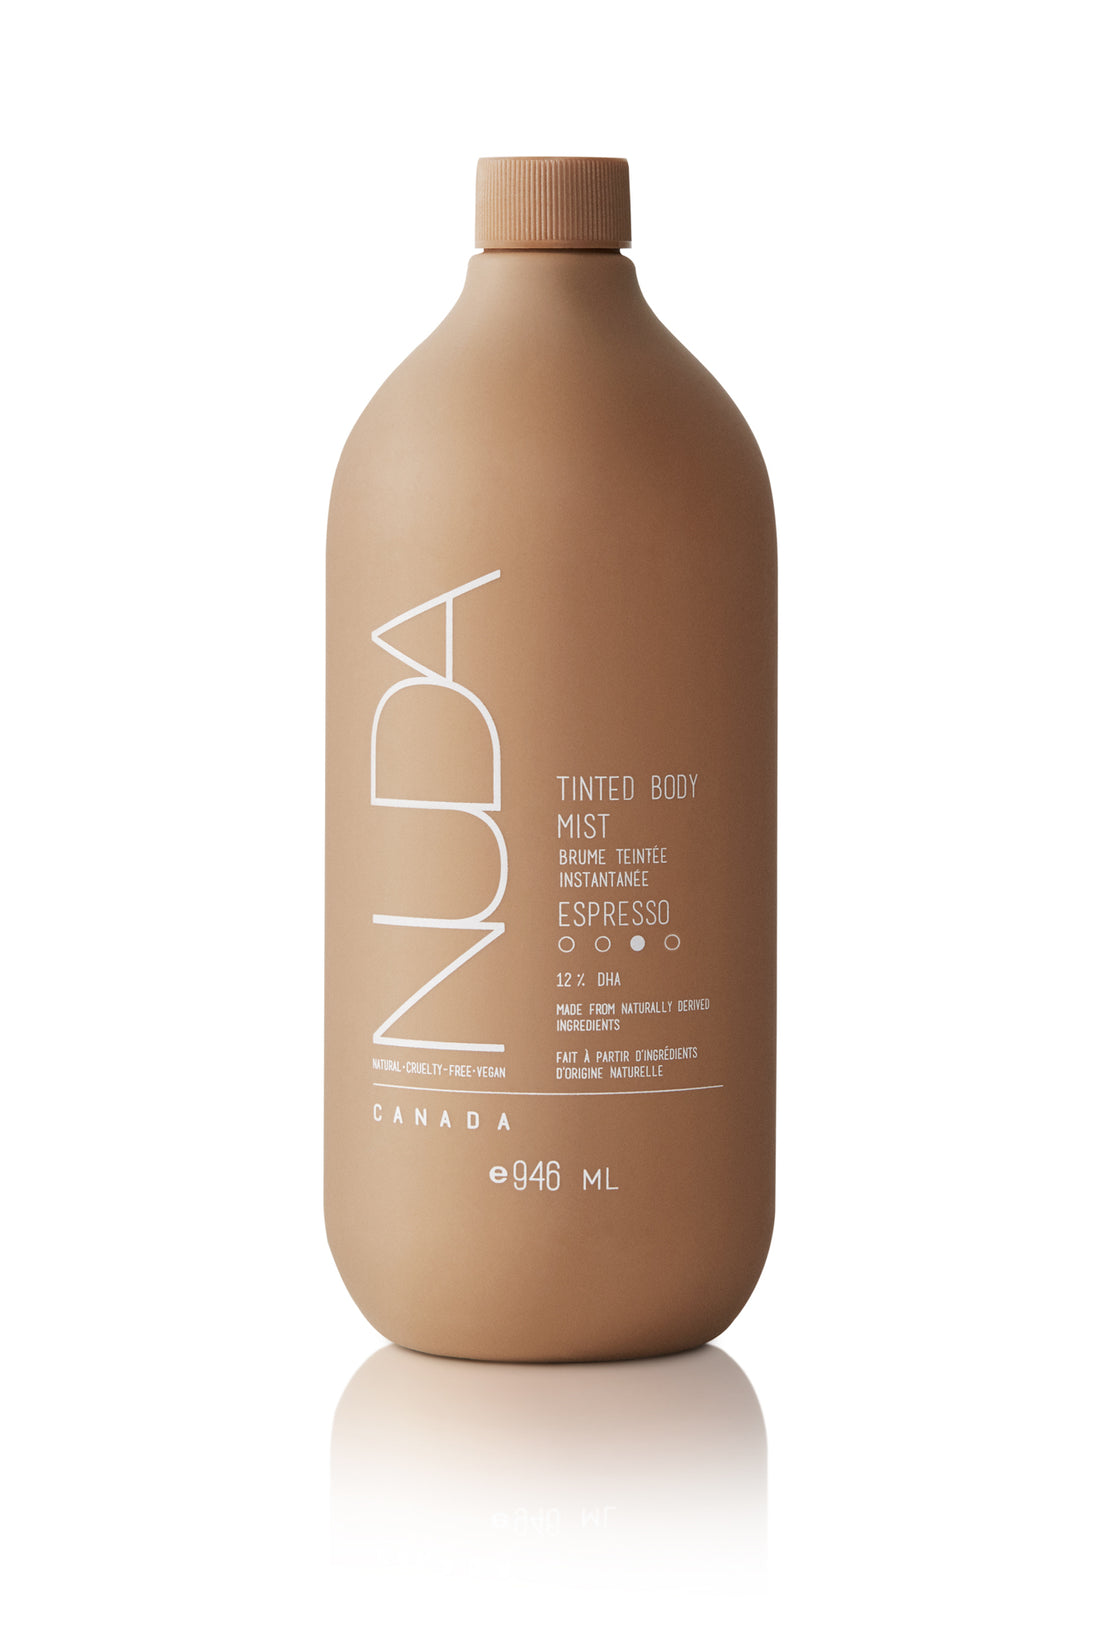 Edgemont A sleek, modern-looking bottle of nuda tinted body mist labeled "espresso" with minimalistic white text, set against a white background. the bottle is tan, reflecting the shade of the product. North Vancouver